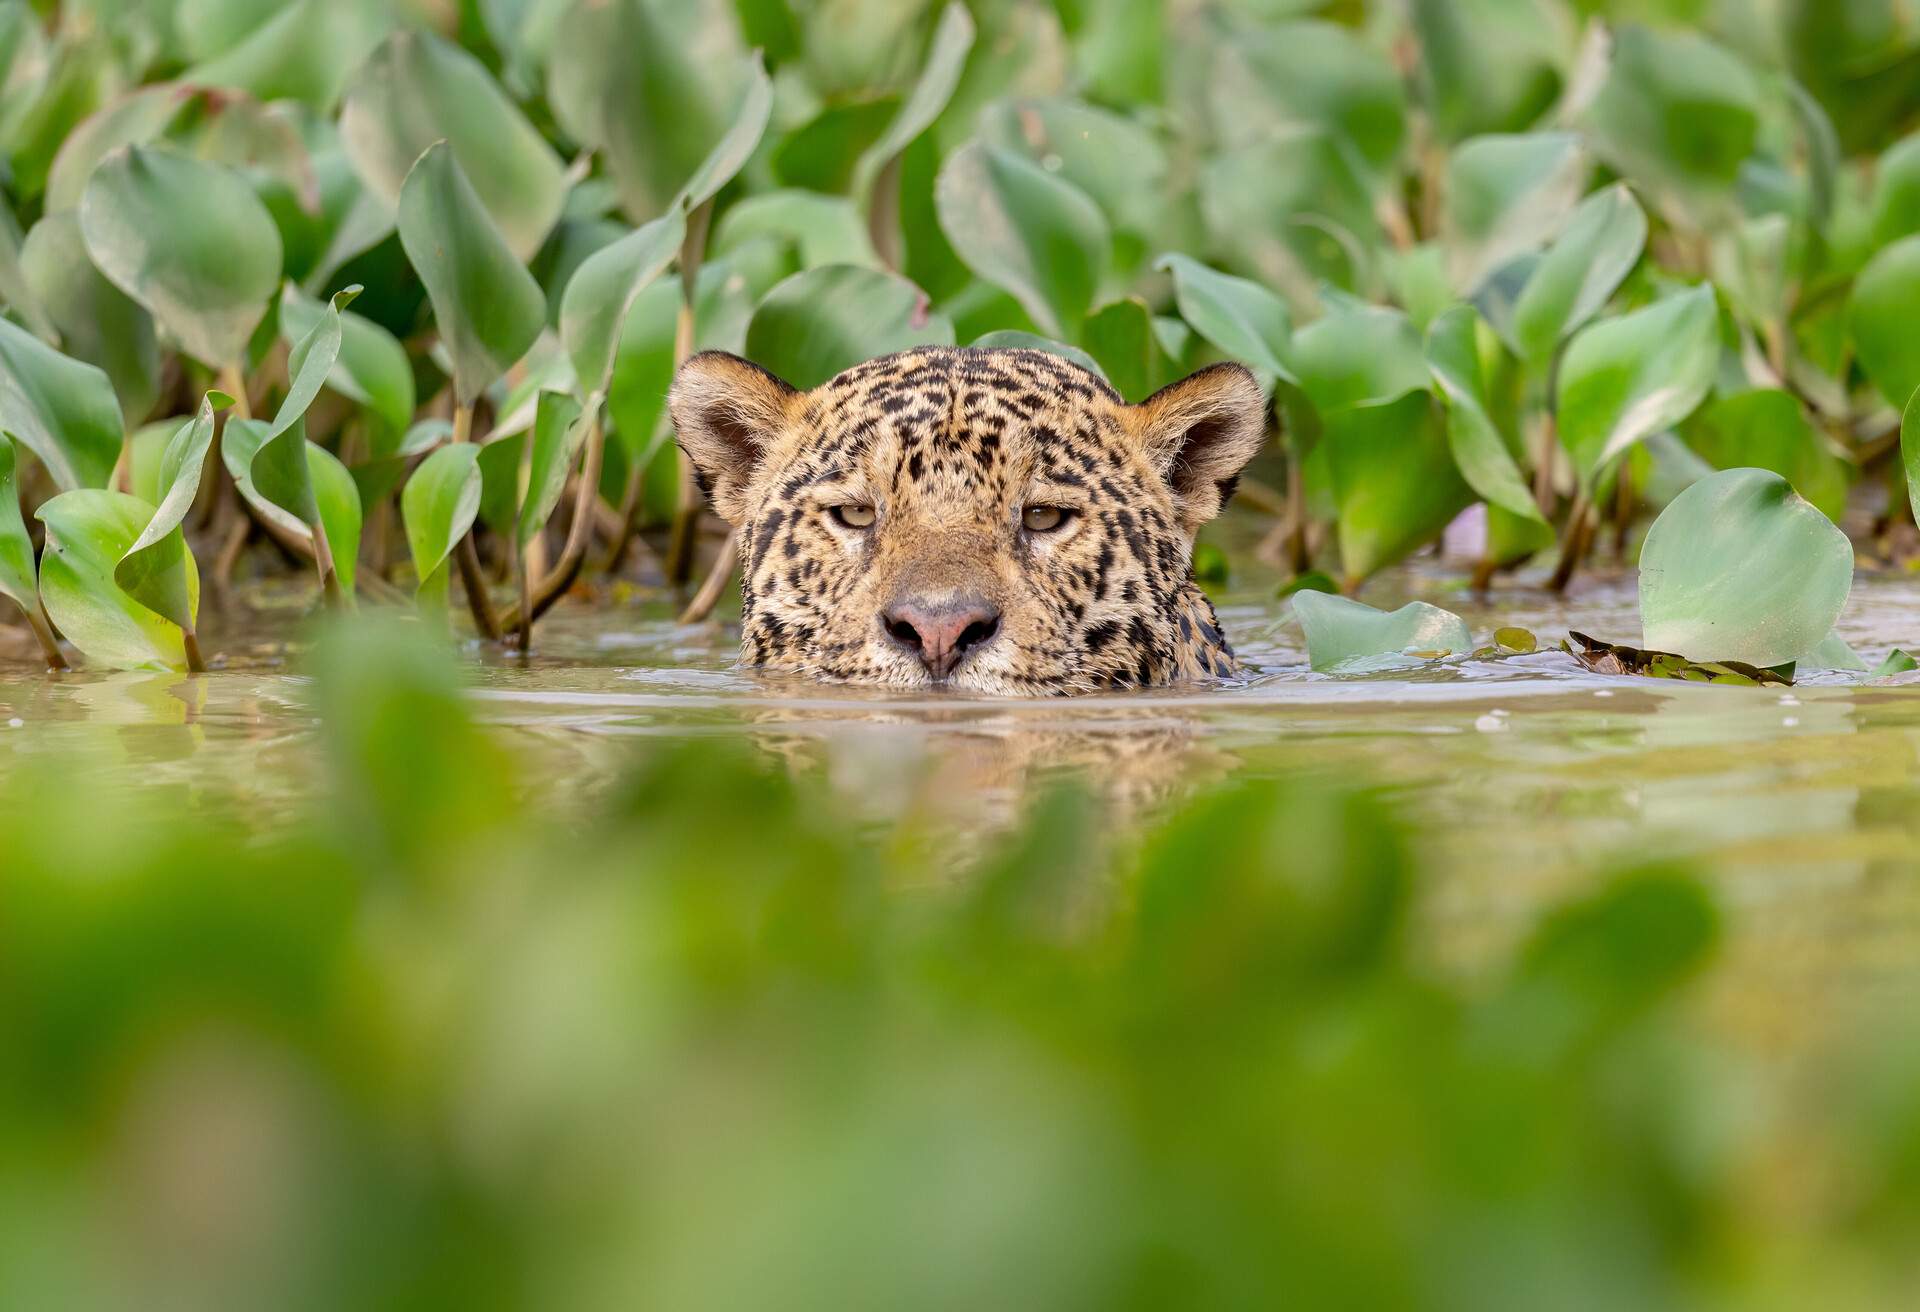 Jaguars are excellent swimmers and they like doing that when they are hunting